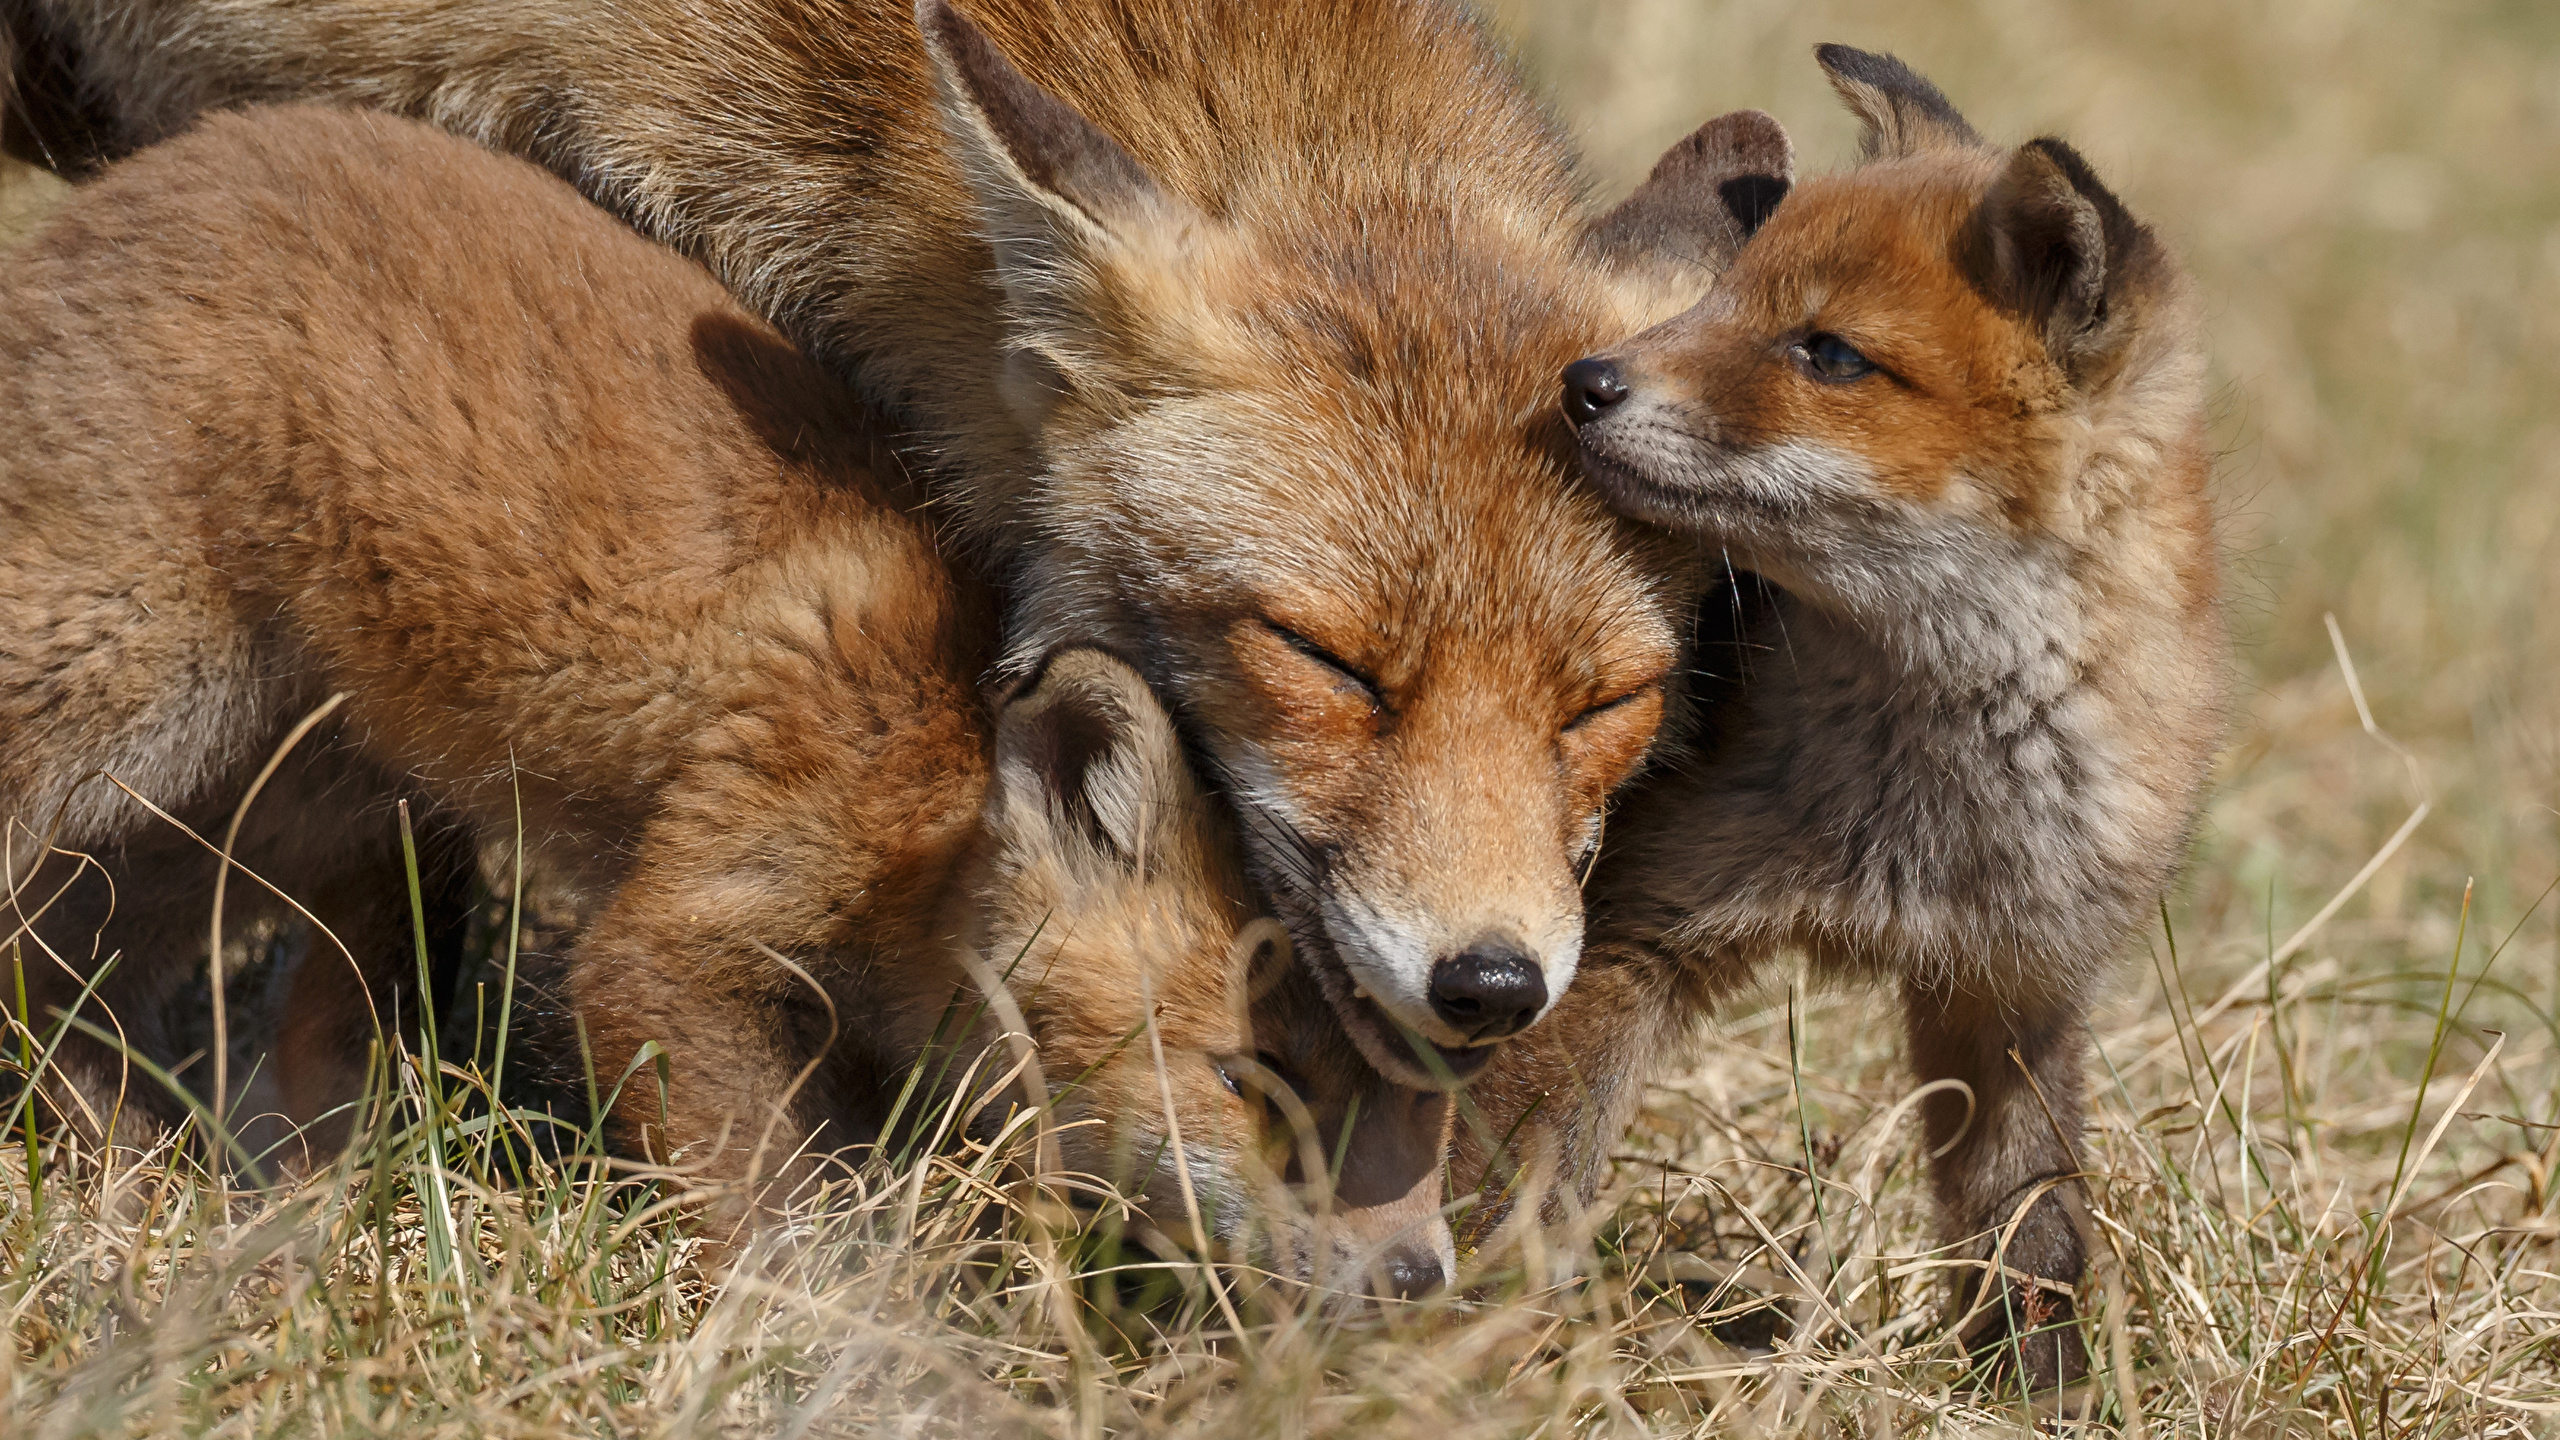 Wallpaper Foxes Cubs Three 3 animal 2560x1440